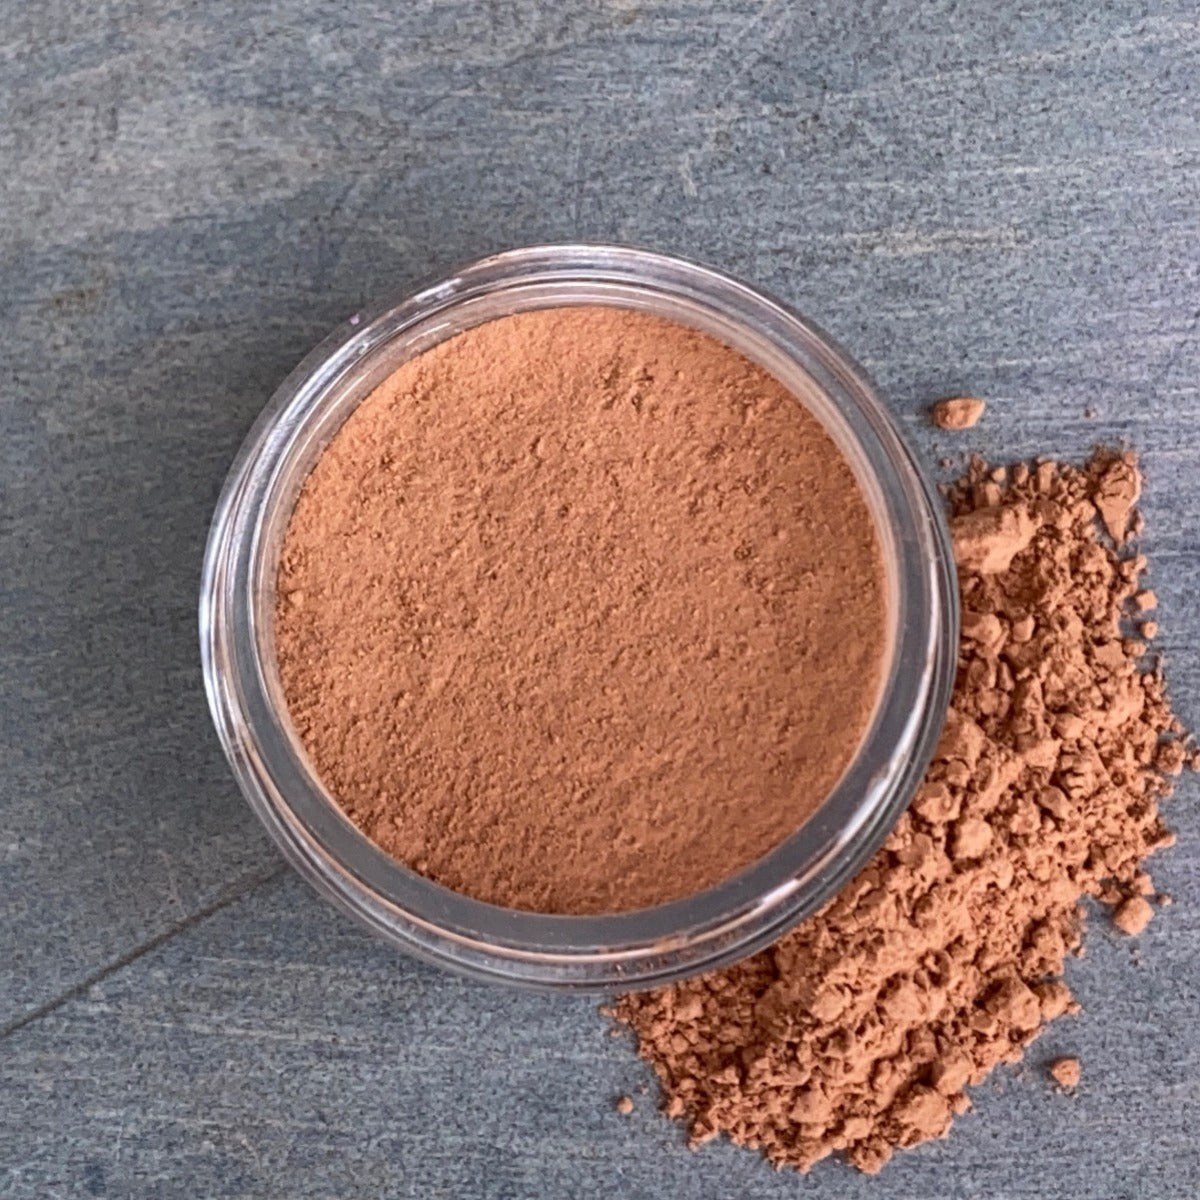 Cosmetic jar of warm tan blush loose powder bronzer displaying its color and texture